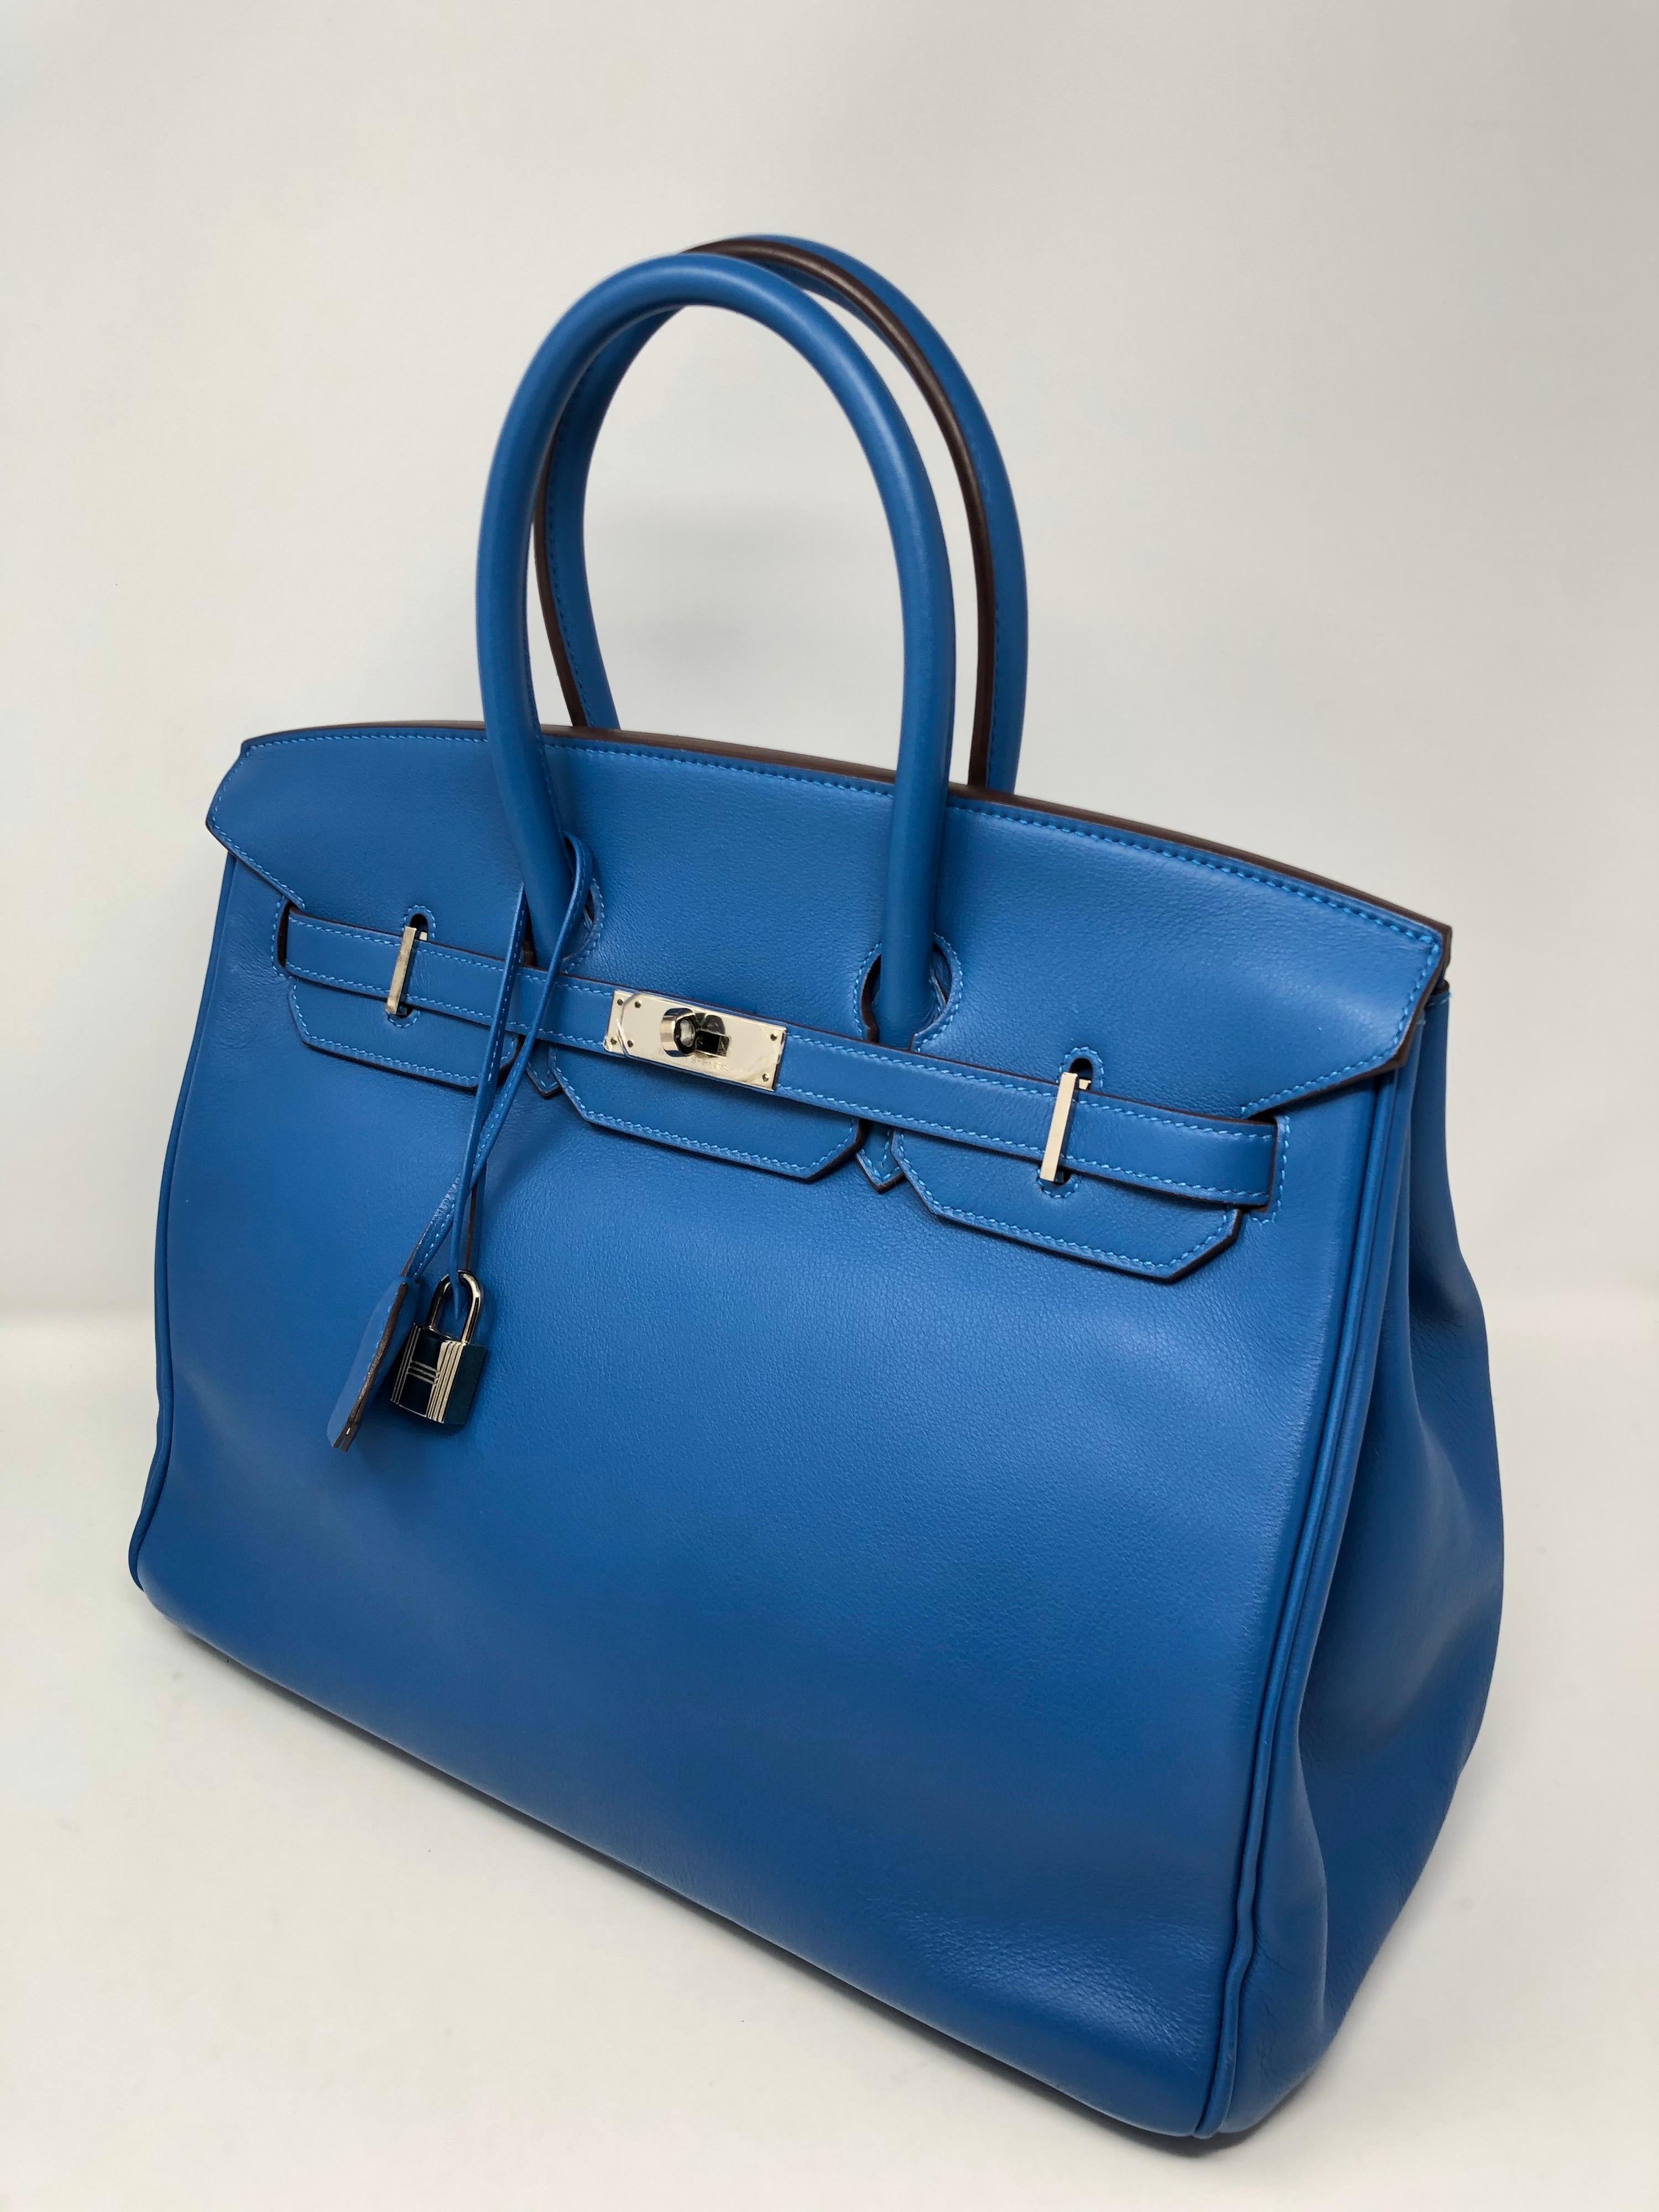 Hermes Birkin 35 Mykonos Blue Bag. Palladium hardware. Swift leather. Excellent condition. Beautiful blue color. Includes full set. Clochette, lock, keys, dust cover and box. Guaranteed authentic. 